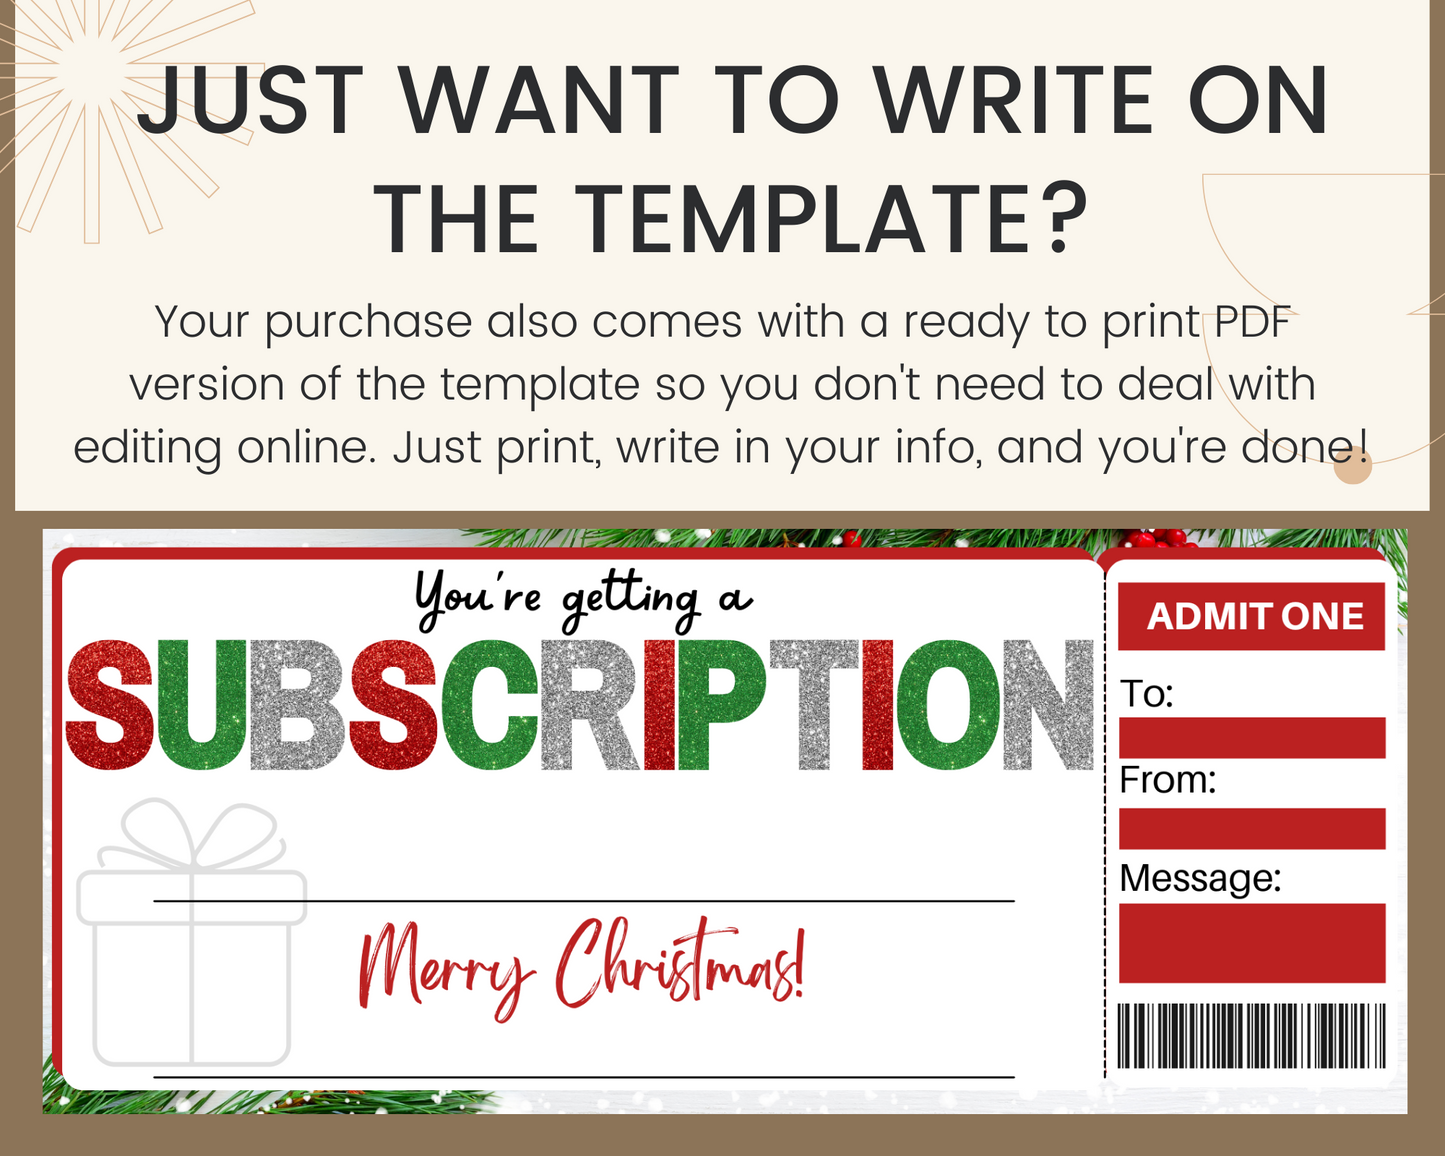 Christmas Subscription Gift Ticket Template